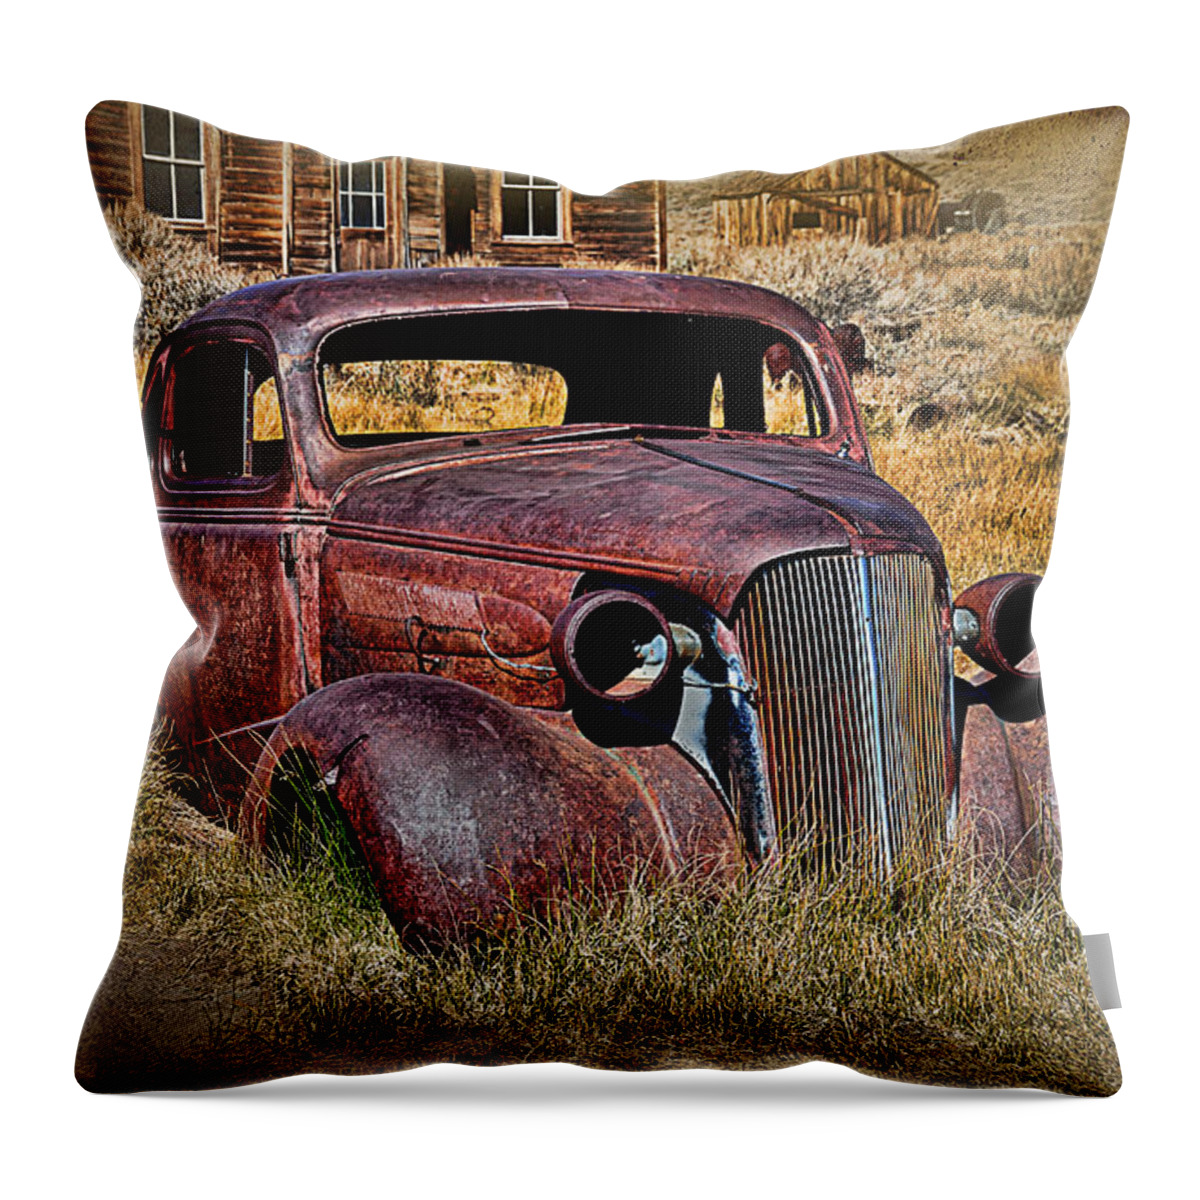 1937 Chevrolet Coupe Throw Pillow featuring the photograph 1937 Chevrolet Coupe by Norma Warden